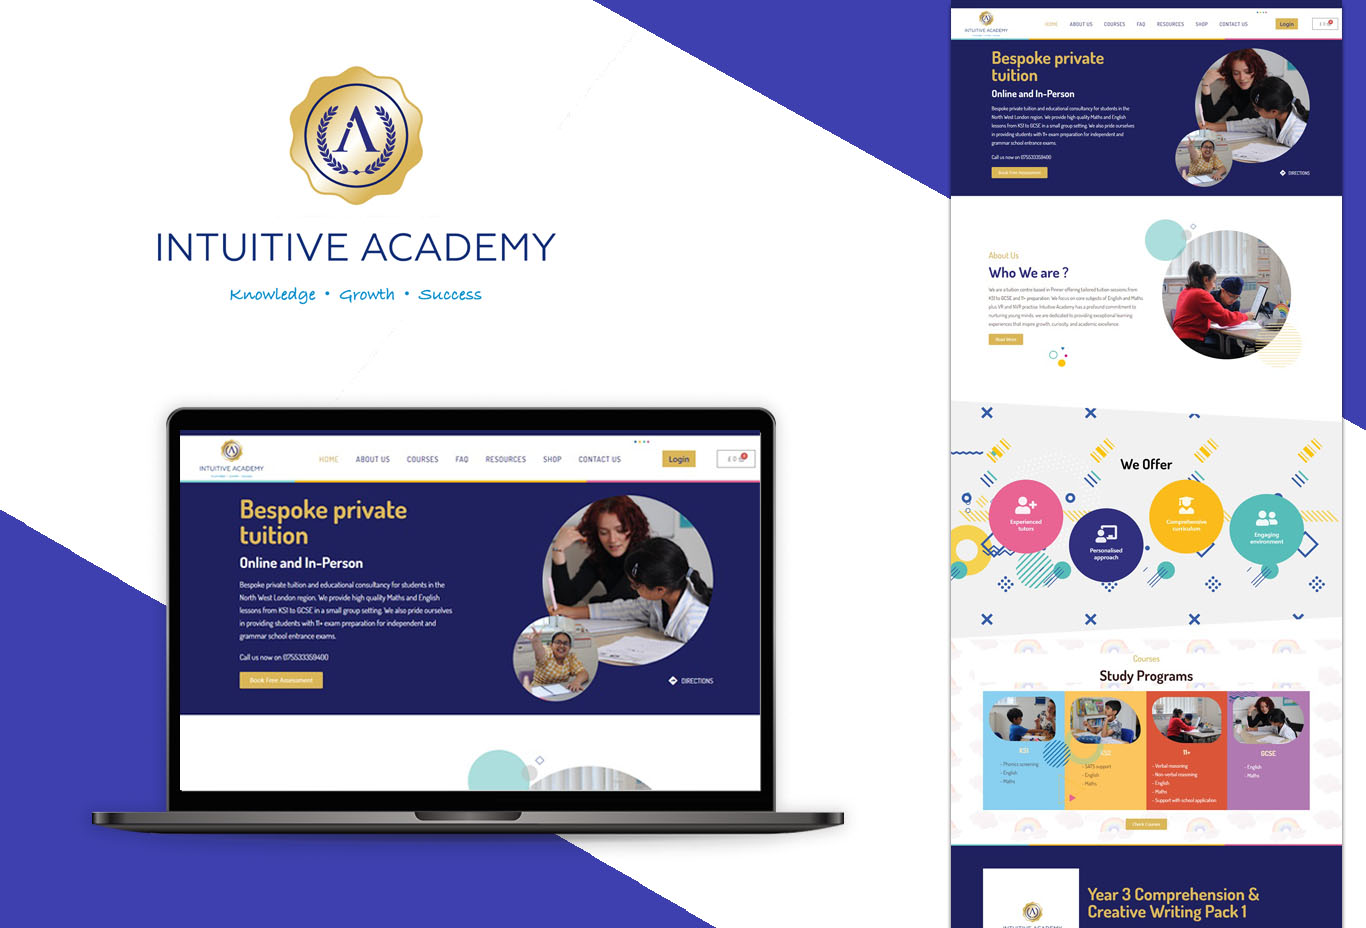 intuitiveacademy.co.uk -tuition centre in Pinner - website mockup